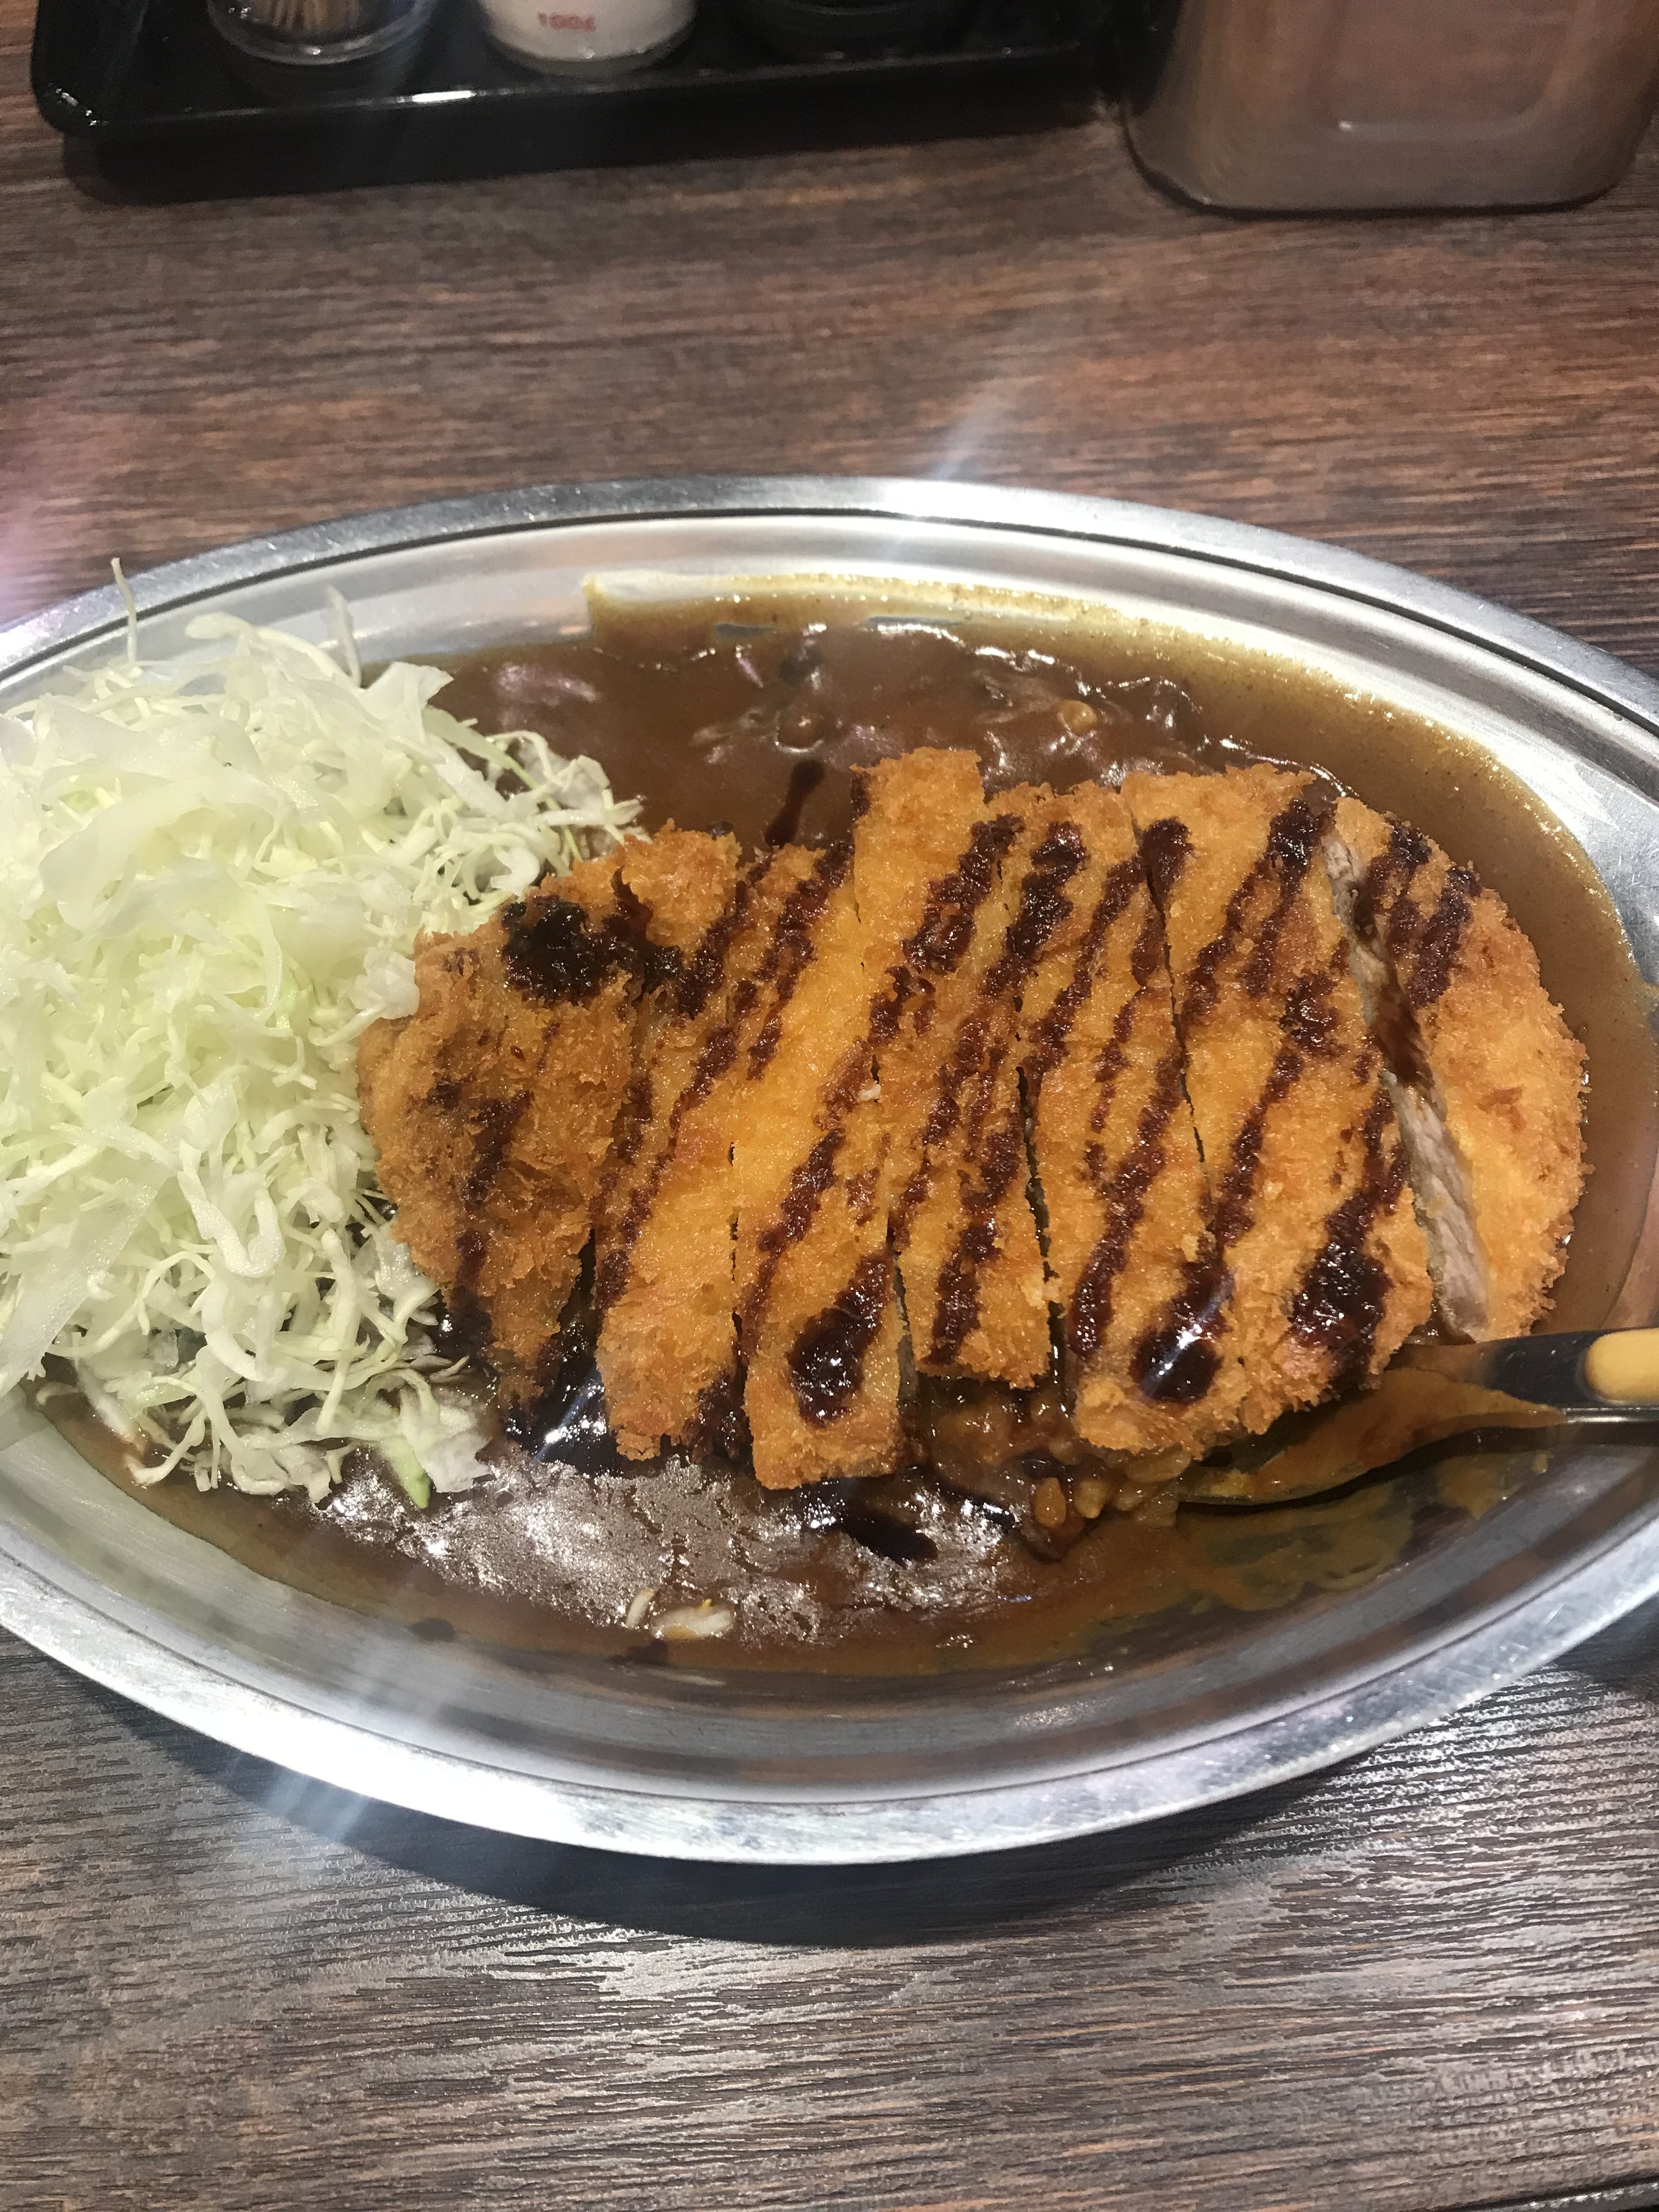 Kanazawa Curry served by the original restaurant, Champion Curry in the basement of Omicho Market